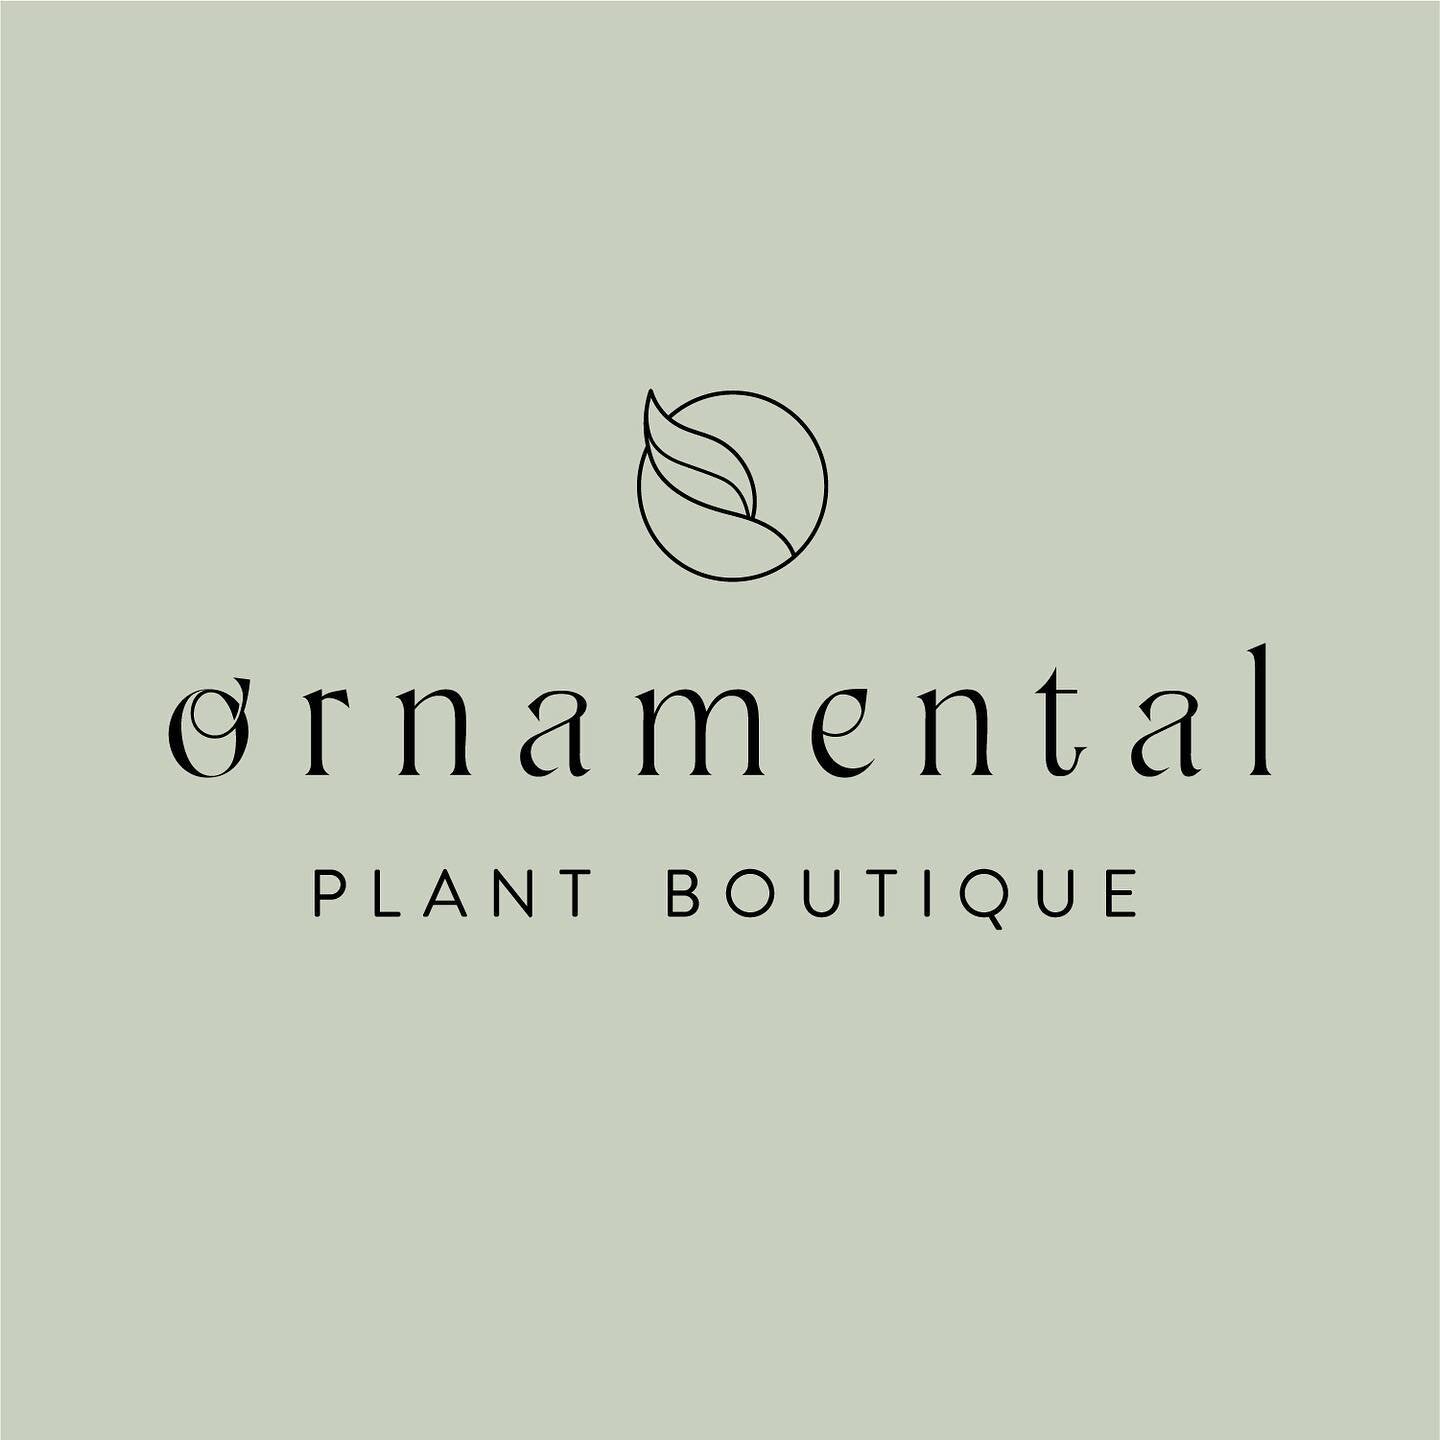 Ornamental has a new website and it is live ! 🌱The site is a place to find all sorts of plant care information that I&rsquo;ll be adding to consistently. Thanks to @christinedevsdesign for all the hard work and persistence in teaching me how to get 